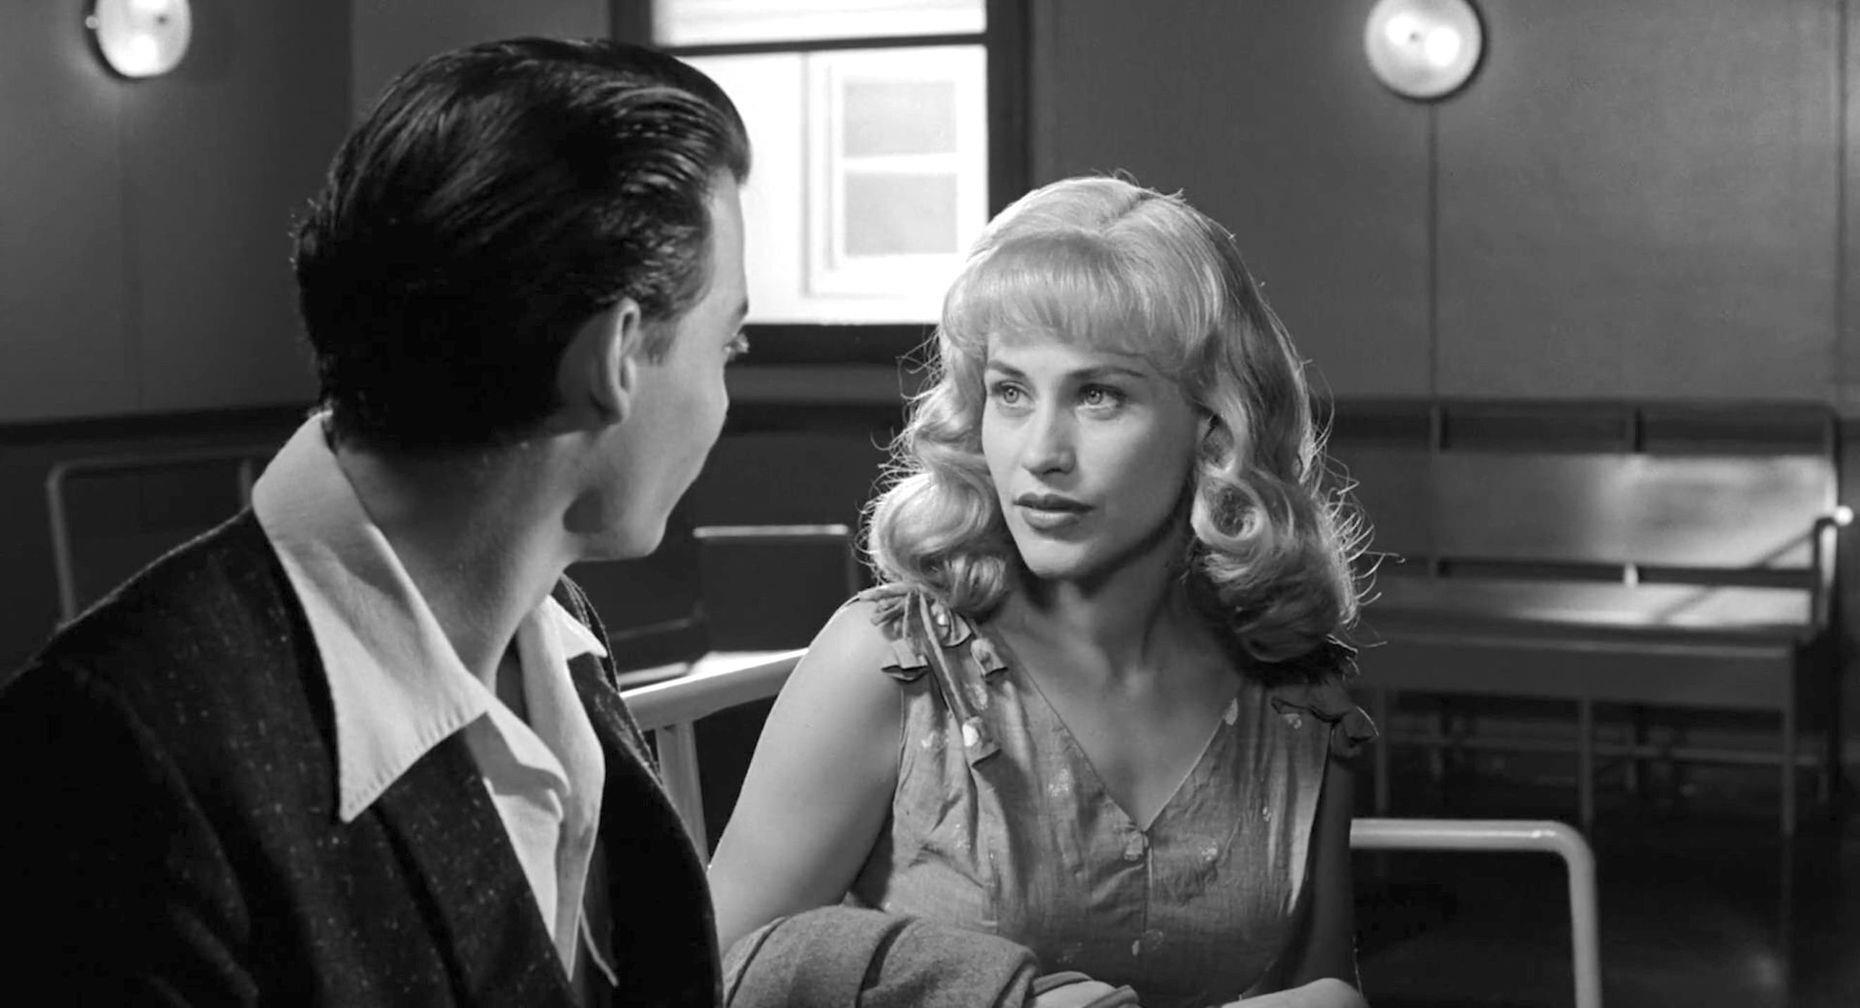 <p>Patricia Arquette added working with director Tim Burton to her list of achievements with this film. <em>Ed Wood</em> is a black and white biopic about <a href="https://musingsofamiddleagedgeek.blog/2019/09/21/tim-burtons-ed-wood-knocking-on-wood-for-25-years/" rel="noreferrer noopener">Edward D. Wood, a 1950s director</a> with a whimsically colourful personality. Patricia Arquette plays Kathy O’Hara, the main character’s romantic interest, alongside an impressive cast that includes Johnny Depp, Bill Murray, and Sarah Jessica Parker. <em>Ed Wood</em> was nominated for best cast ensemble at the Awards Circuit Community Awards and won two Academy Awards.</p>